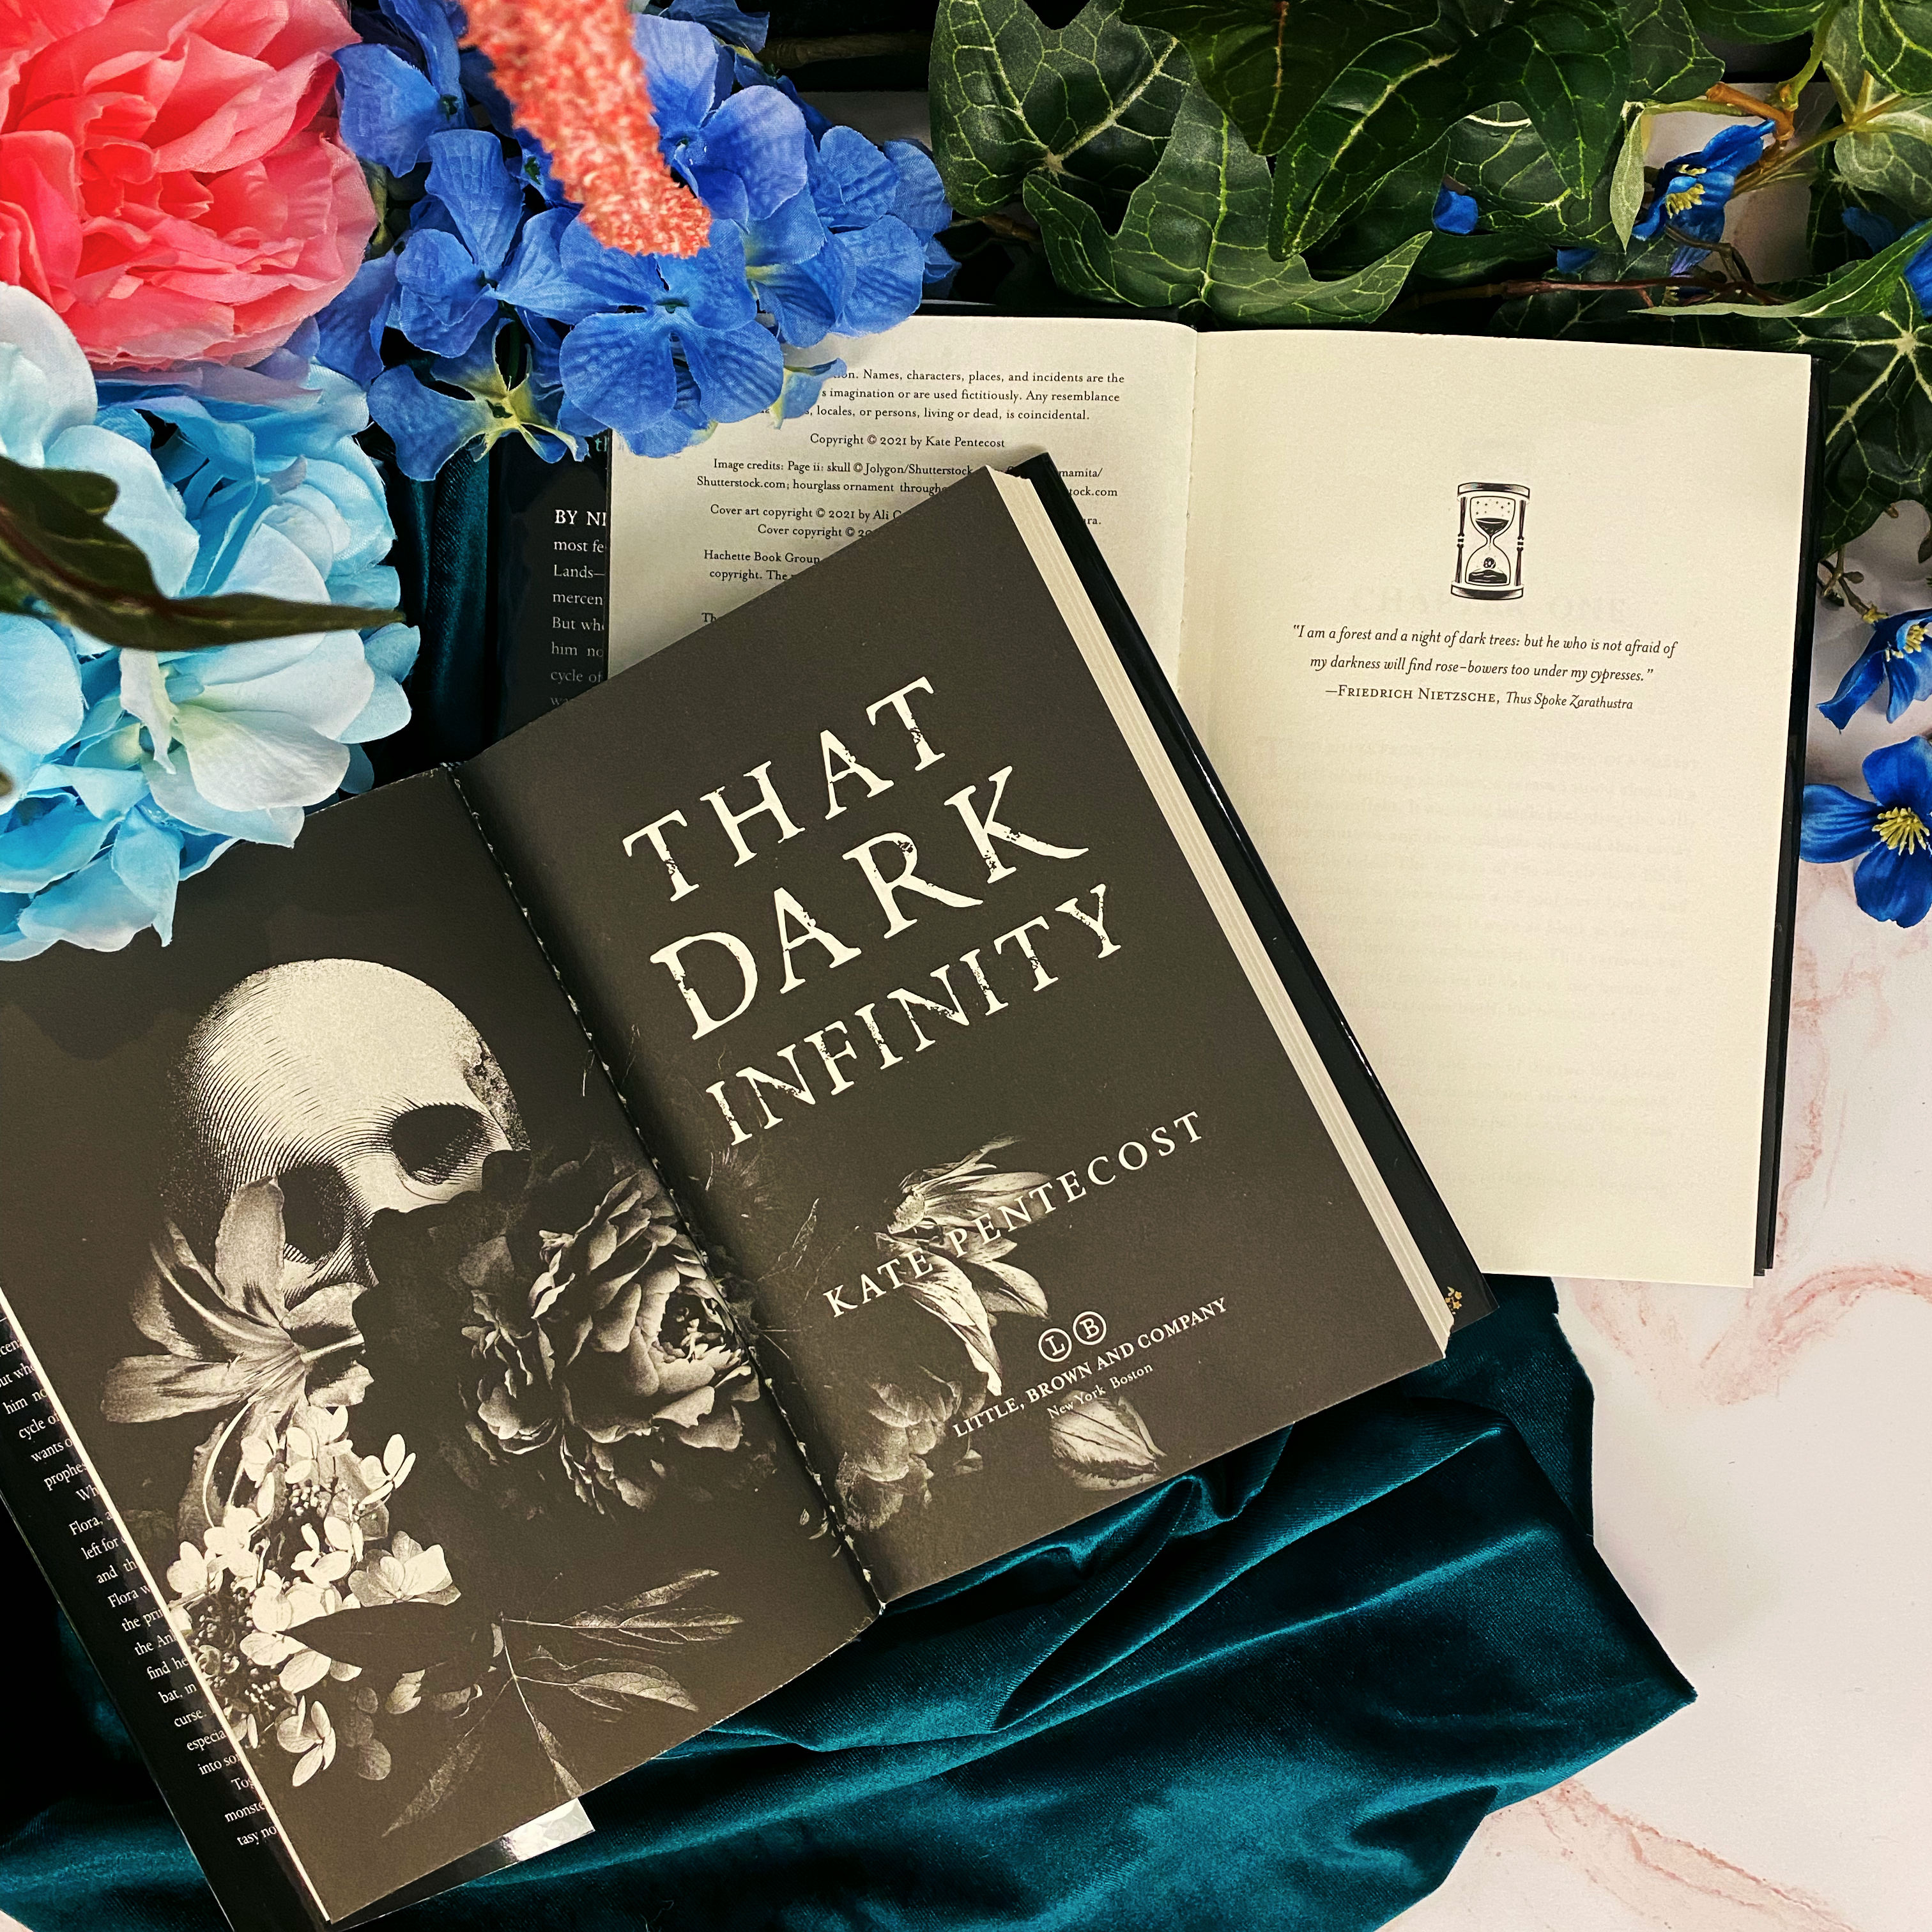 Image of the book "That Dark Infinity" by Kate Pentecost